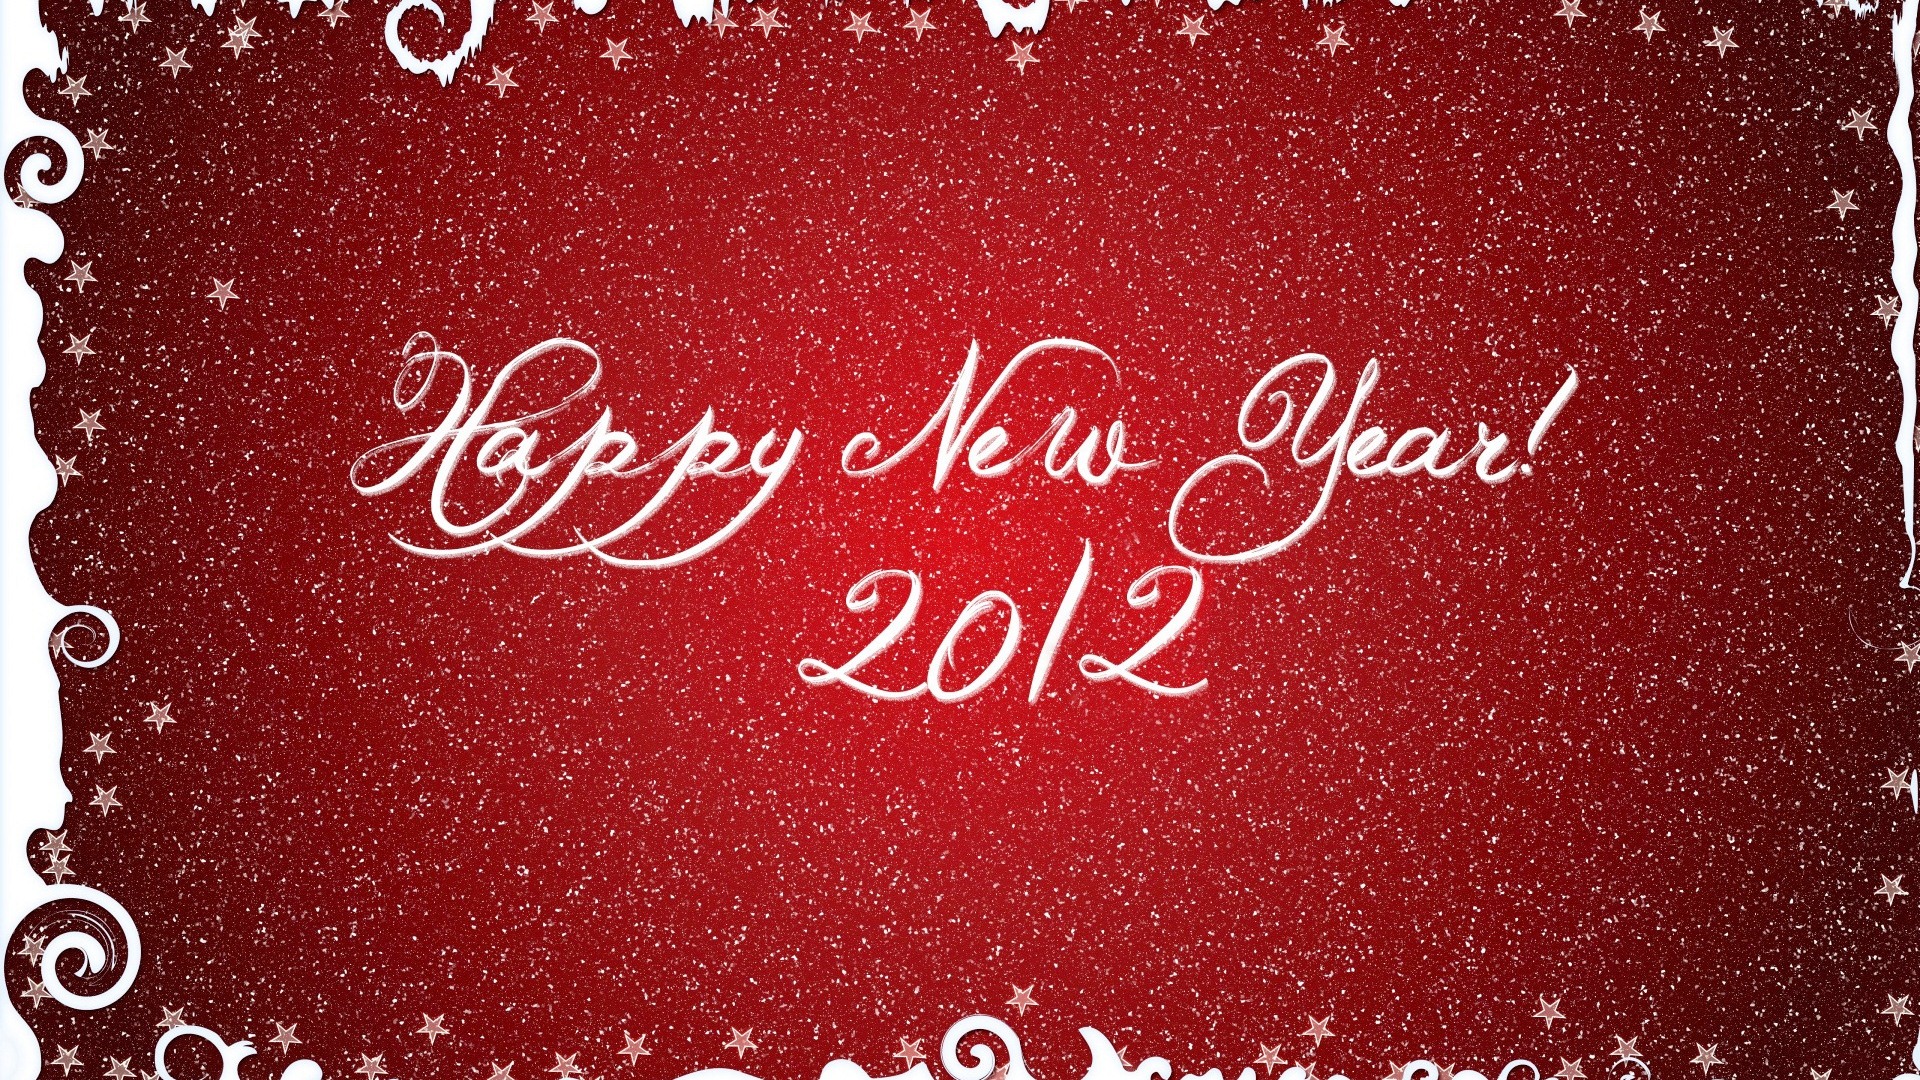 2012 New Year wallpapers (2) #6 - 1920x1080